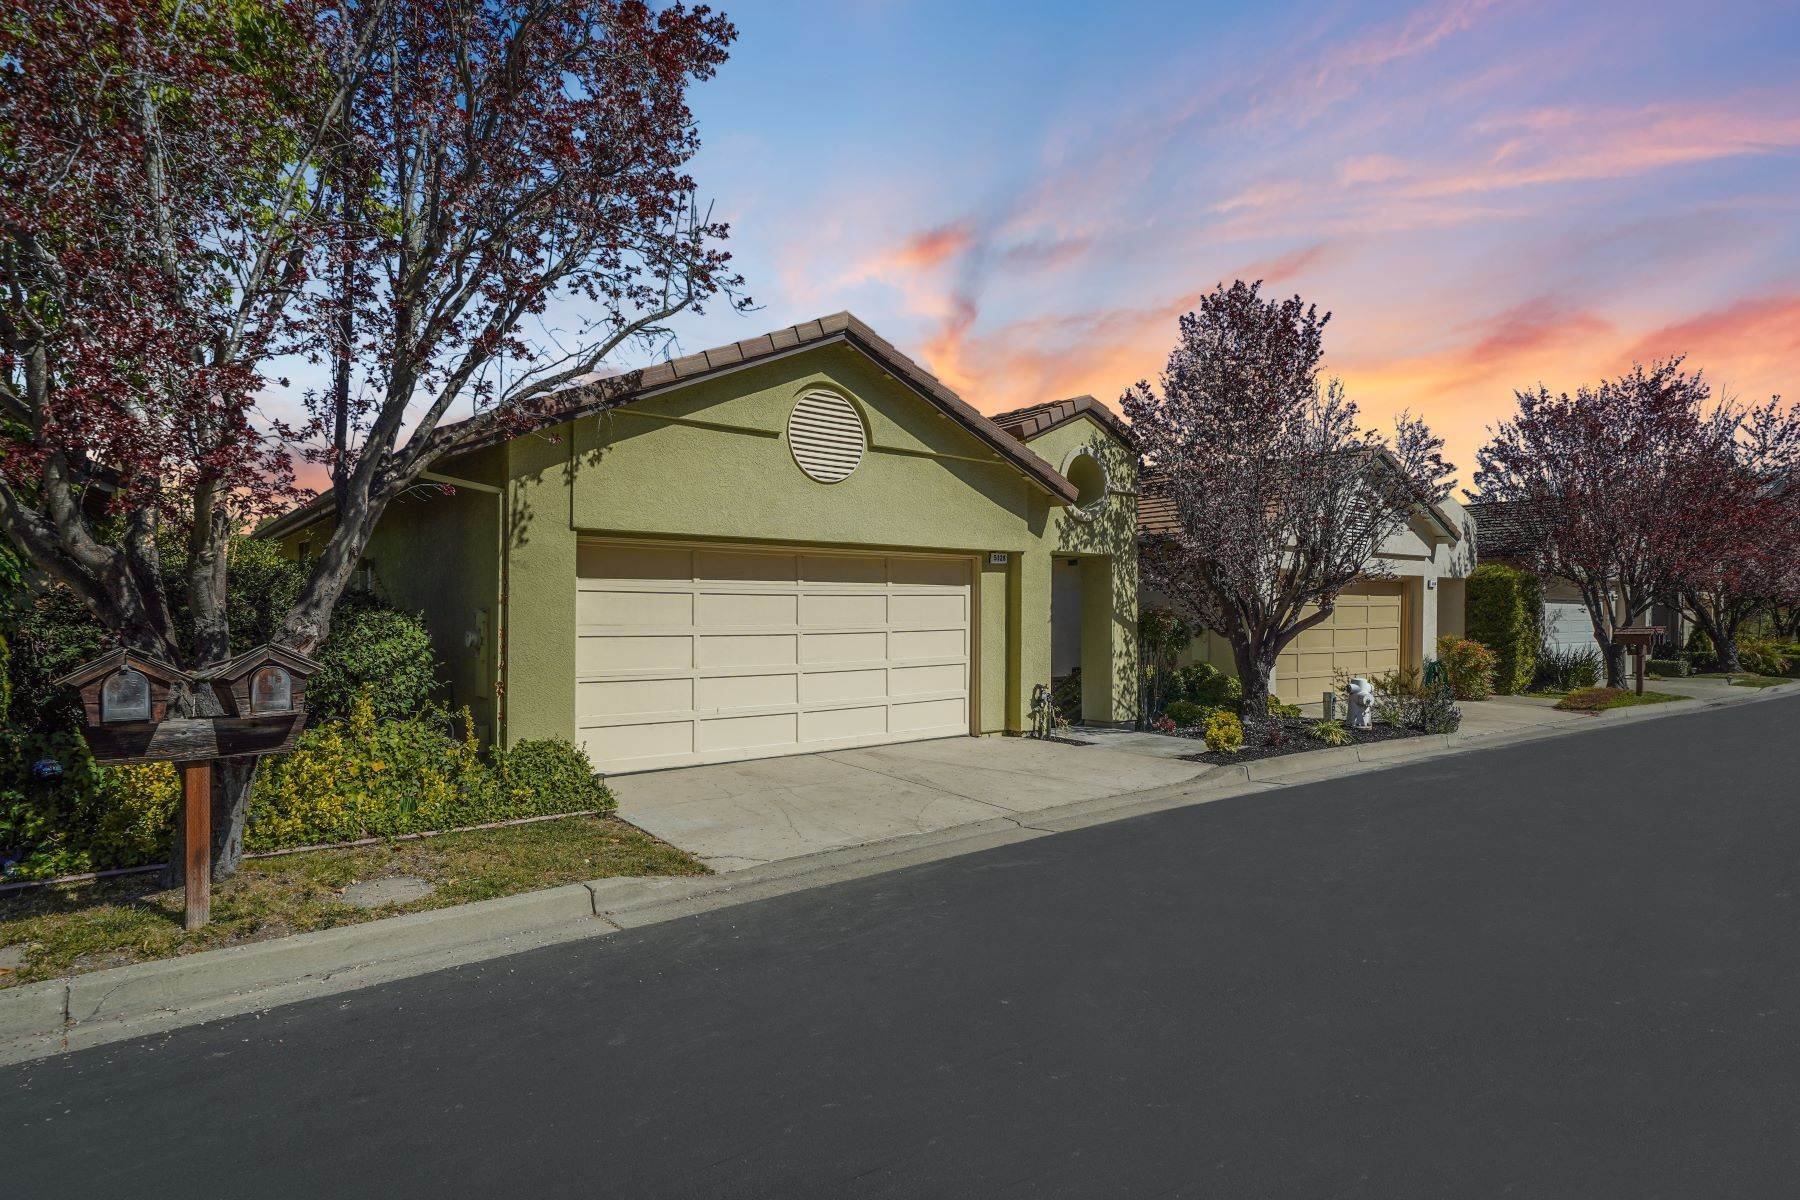 Single Family Homes for Active at Impressive Detached Lakefront Home 5128 East Lakeshore Drive San Ramon, California 94582 United States